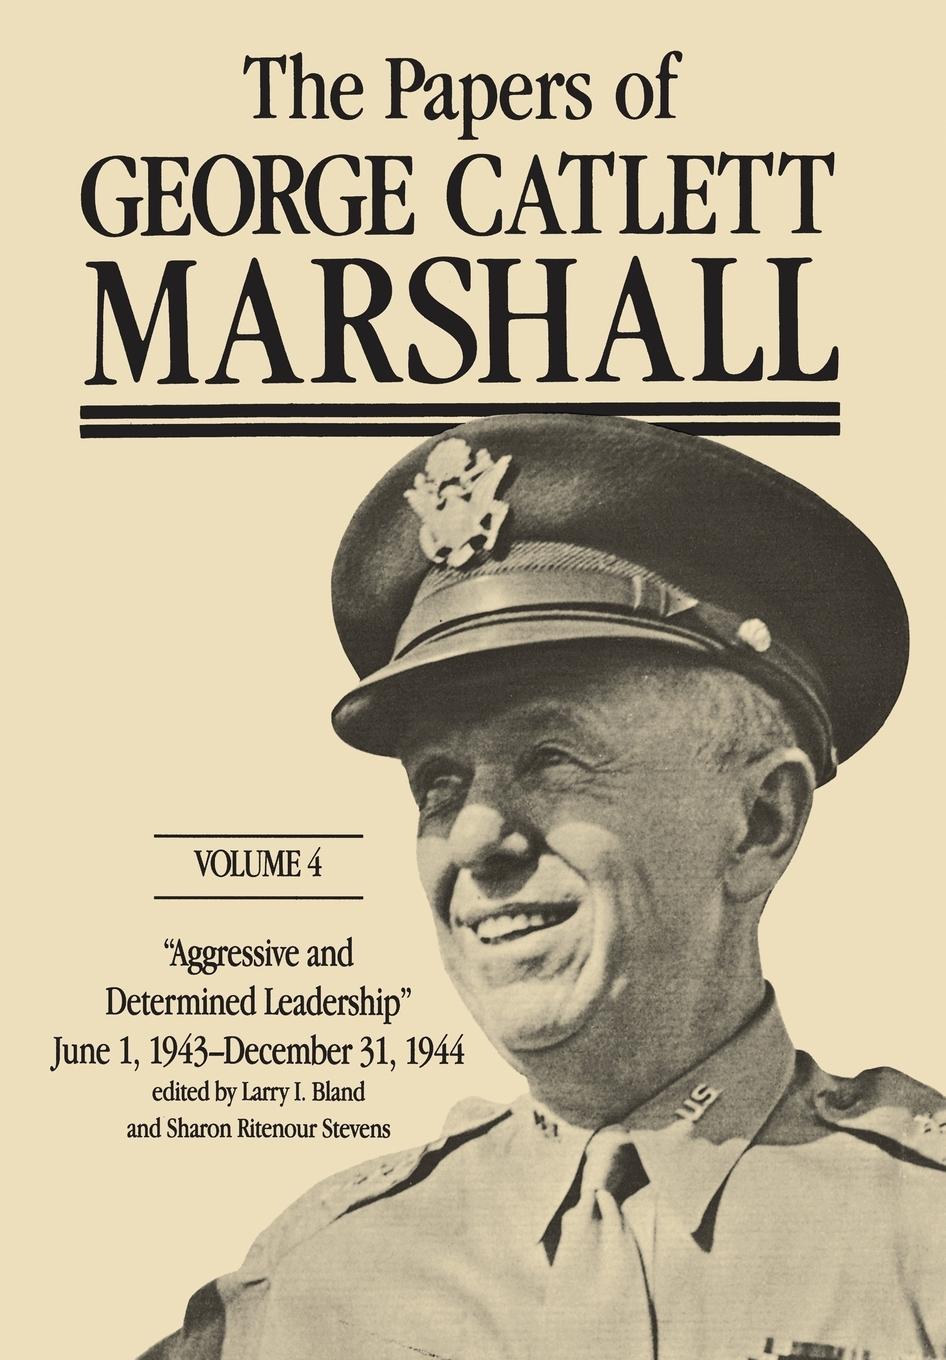 The Papers of George Catlett Marshall: \\ Aggressive and Determined Leadership, June 1, 1943-December 31, 194 - Marshall, George Catlett